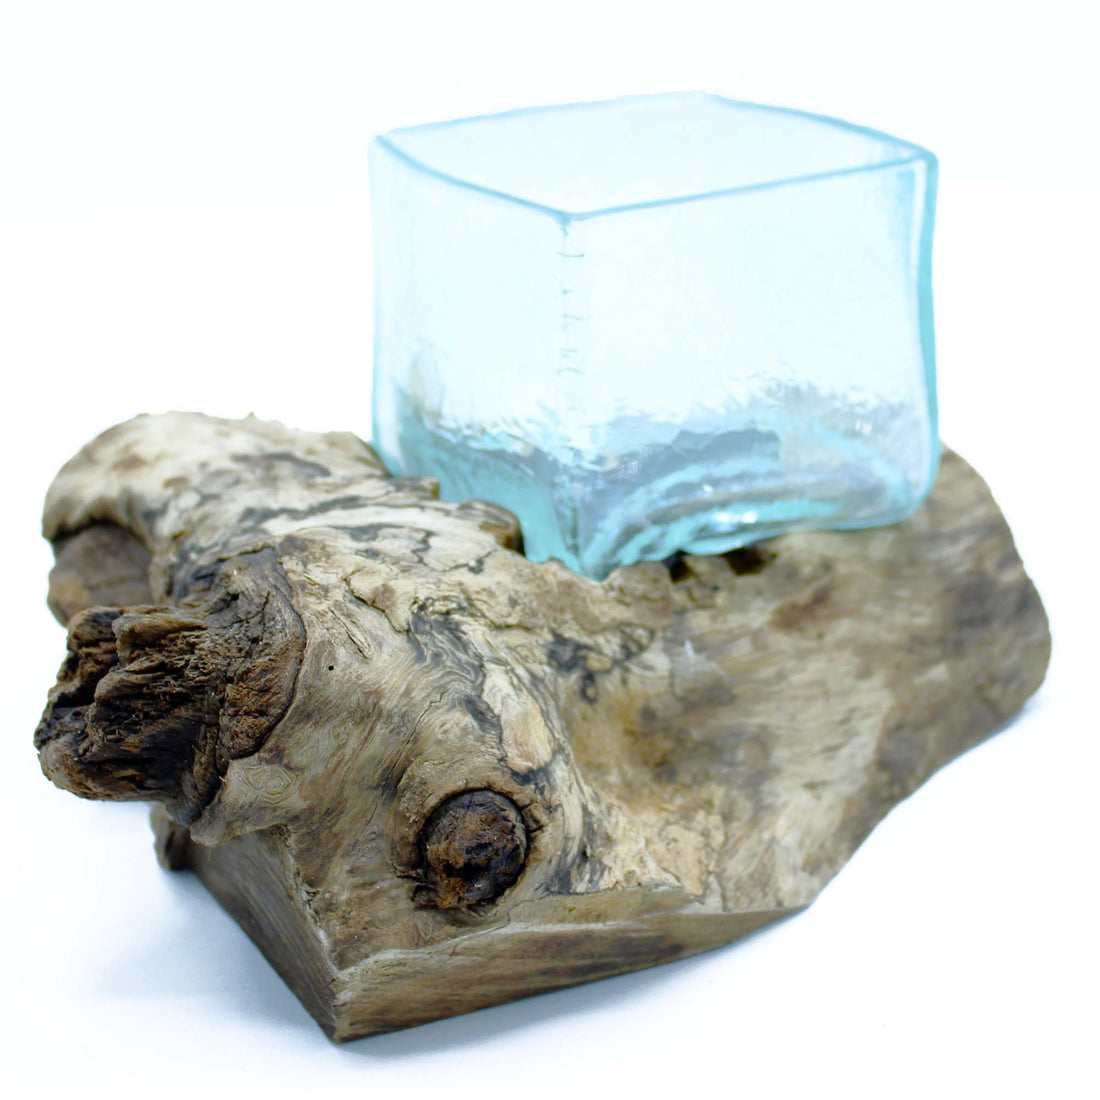 Molten Crackled Glass Tank on Wood - best price from Maltashopper.com MGW-37